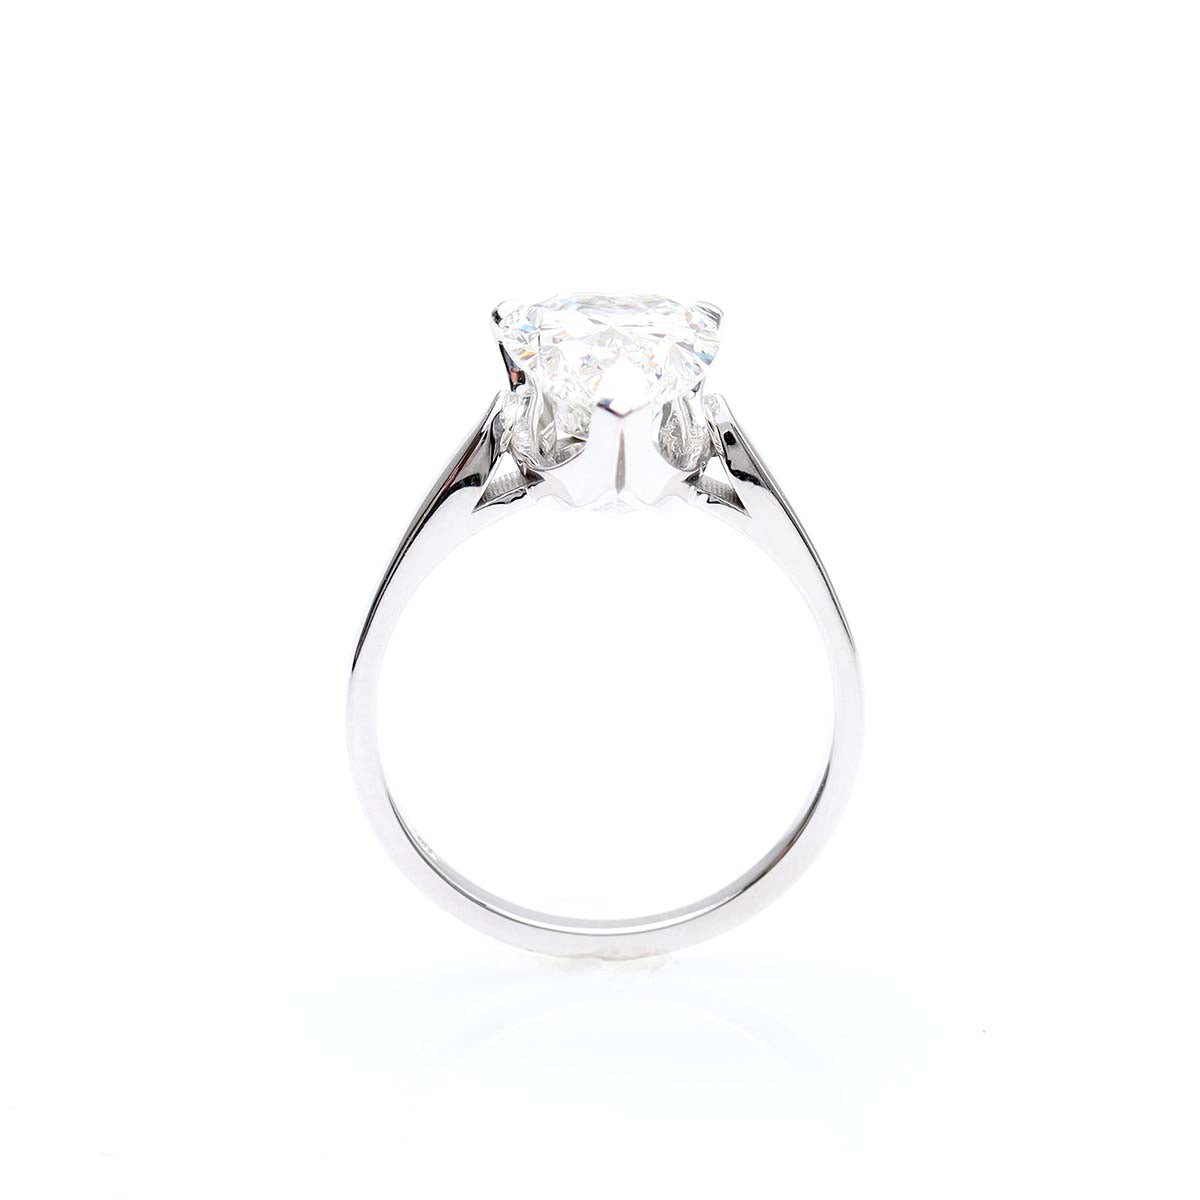 2.73 carat Pear Shape Diamond in Custom Cathedral Setting #3671PS-1